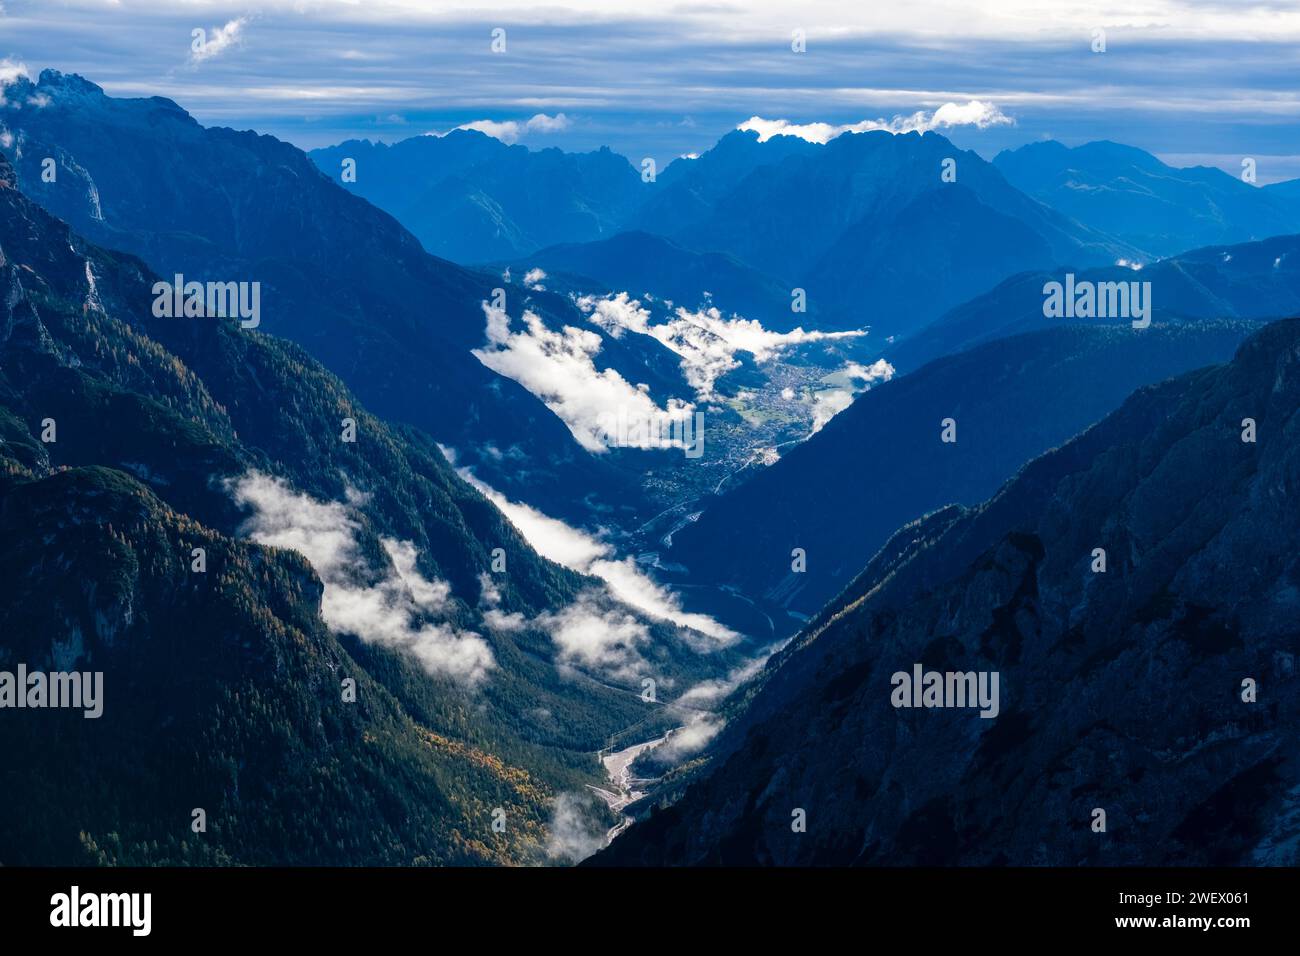 Aerial view on the Ansiei valley, Val d'Ansiei, the town Auronzo di Cadore and the lake Lago di Santa Caterina. Stock Photo